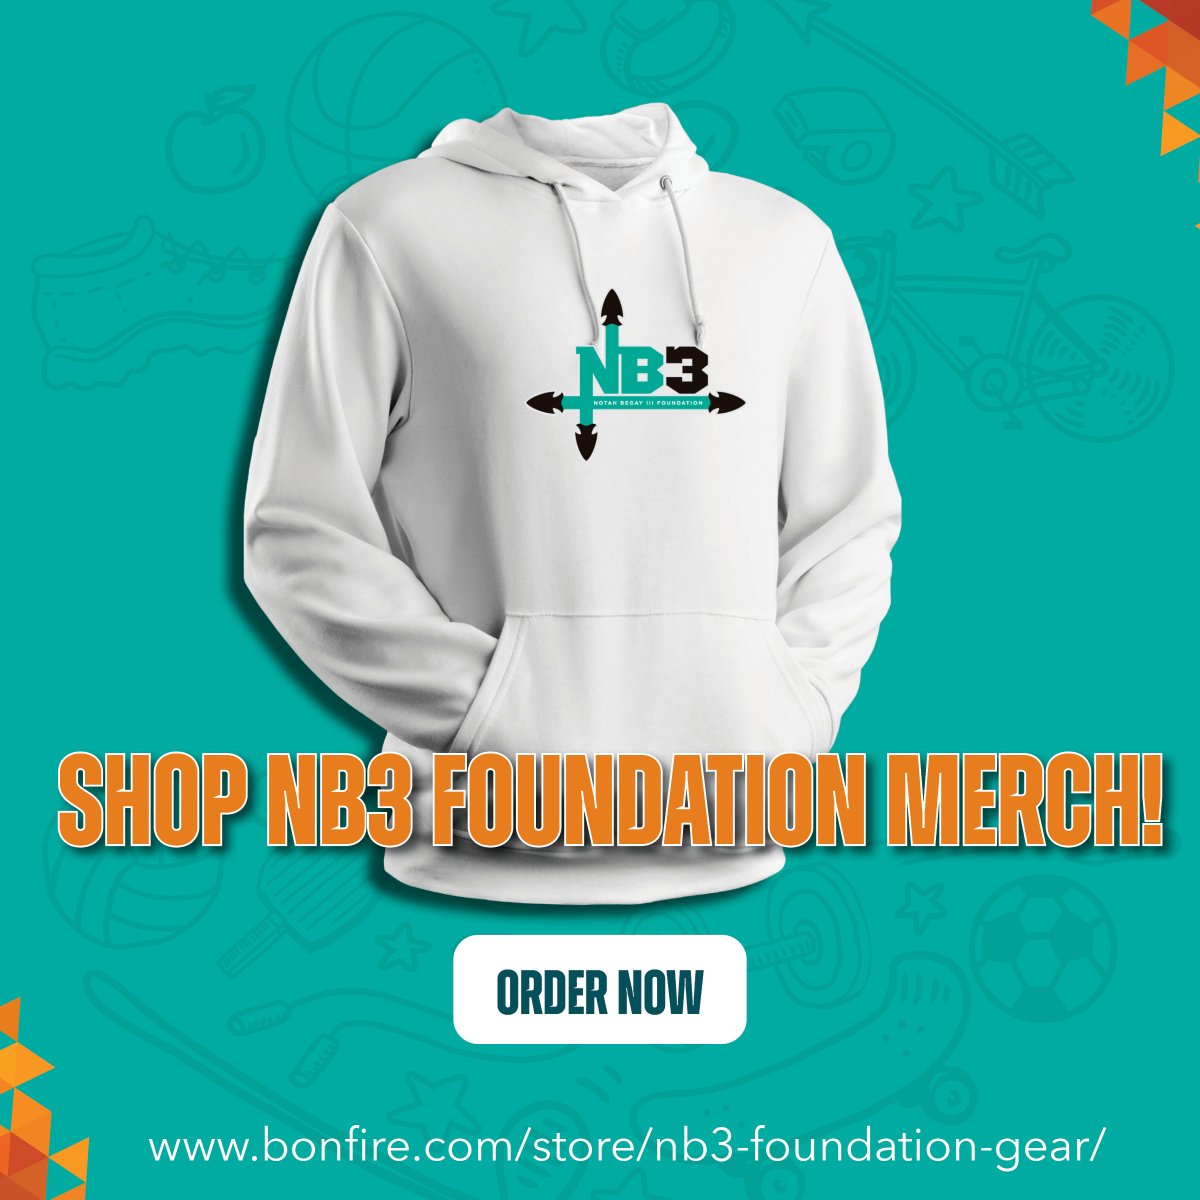 Everyone loves the look of our classic NB3 Foundation t-shirt and hoodie. Rock your #NB3F gear while supporting healthy futures for Native youth! Order online now and have it shipped directly to your home! 🛒bonfire.com/store/nb3-foun… #NB3F #HealthyKidsHealthyFutures